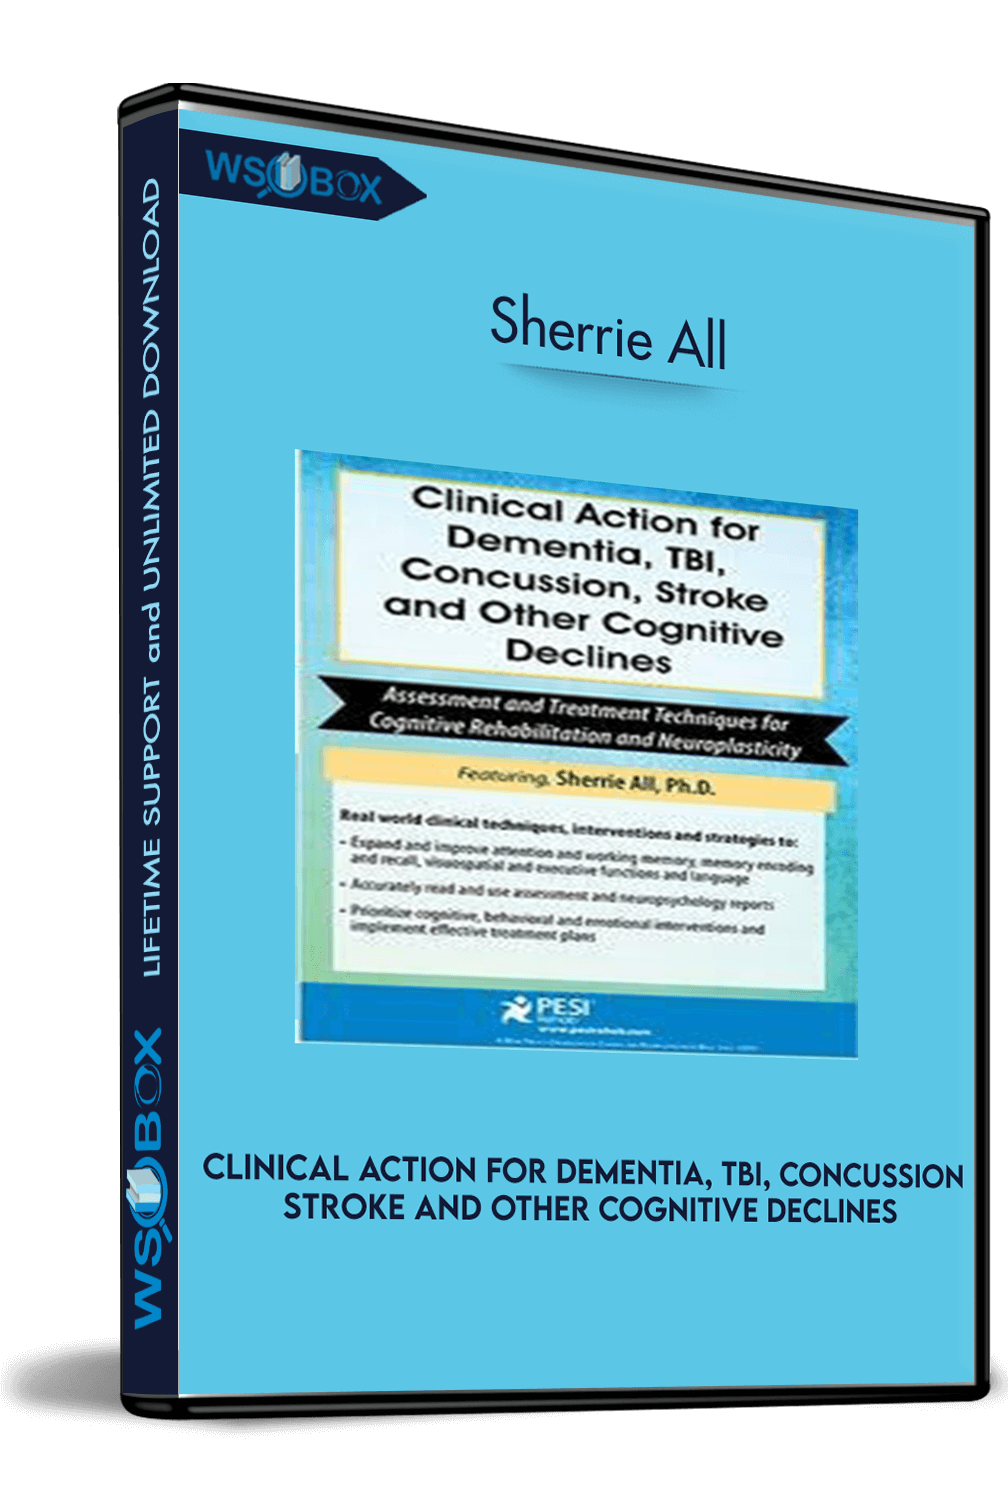 clinical-action-for-dementia-tbi-concussion-stroke-and-other-cognitive-declines-assessment-and-treatment-techniques-for-cognitive-rehabilitation-and-neuroplasticity-sherrie-all